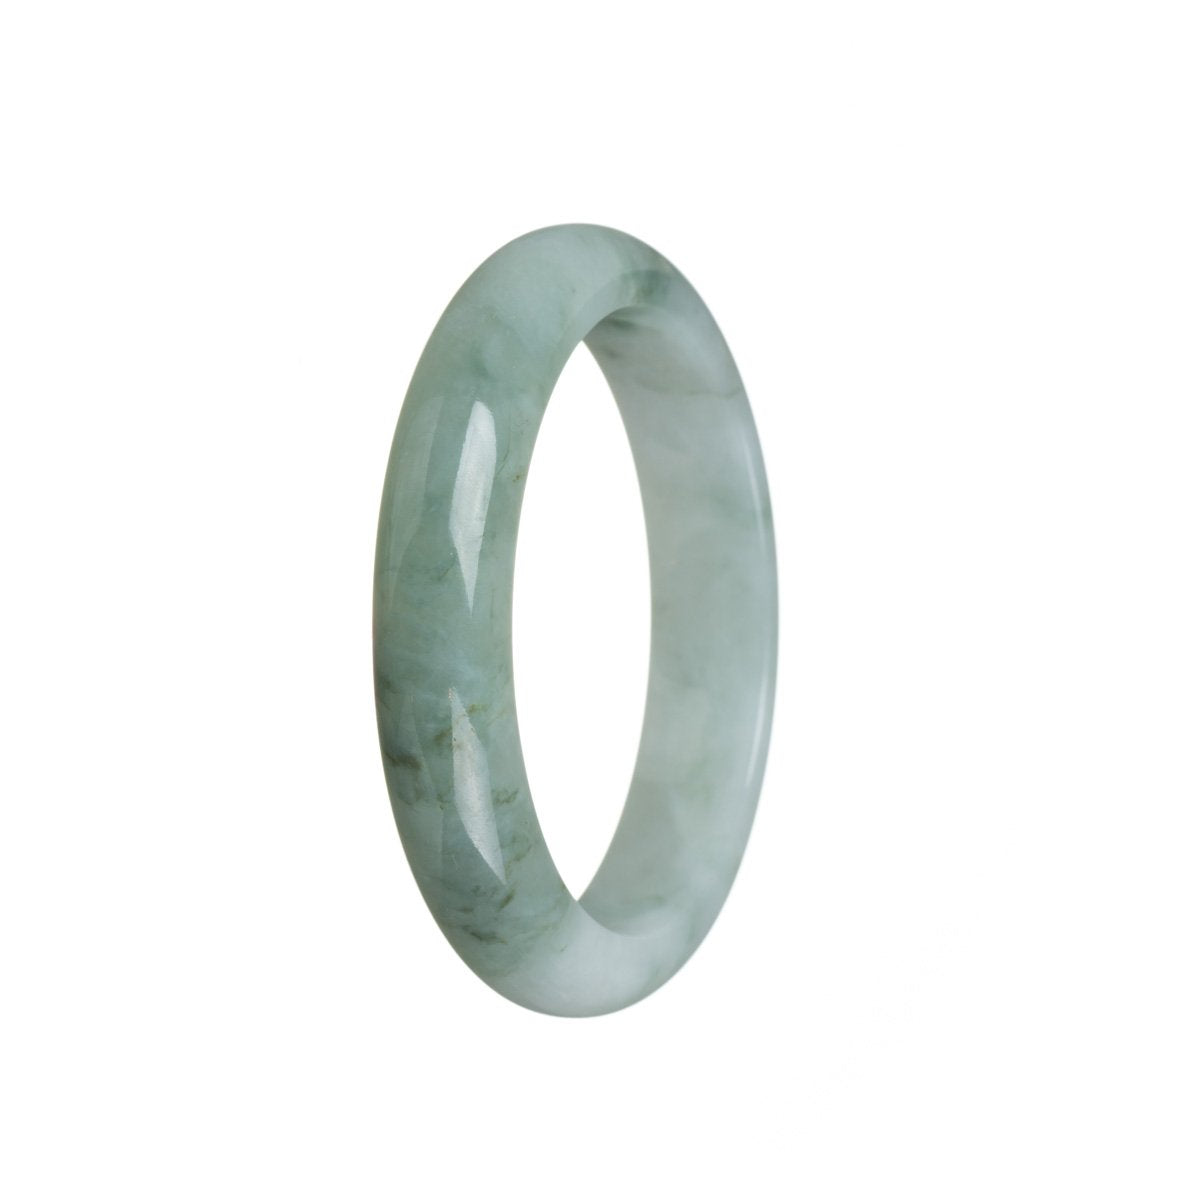 An elegant, untreated greish green jadeite jade bracelet, measuring 55mm in a semi-round shape. Expertly crafted by MAYS™.